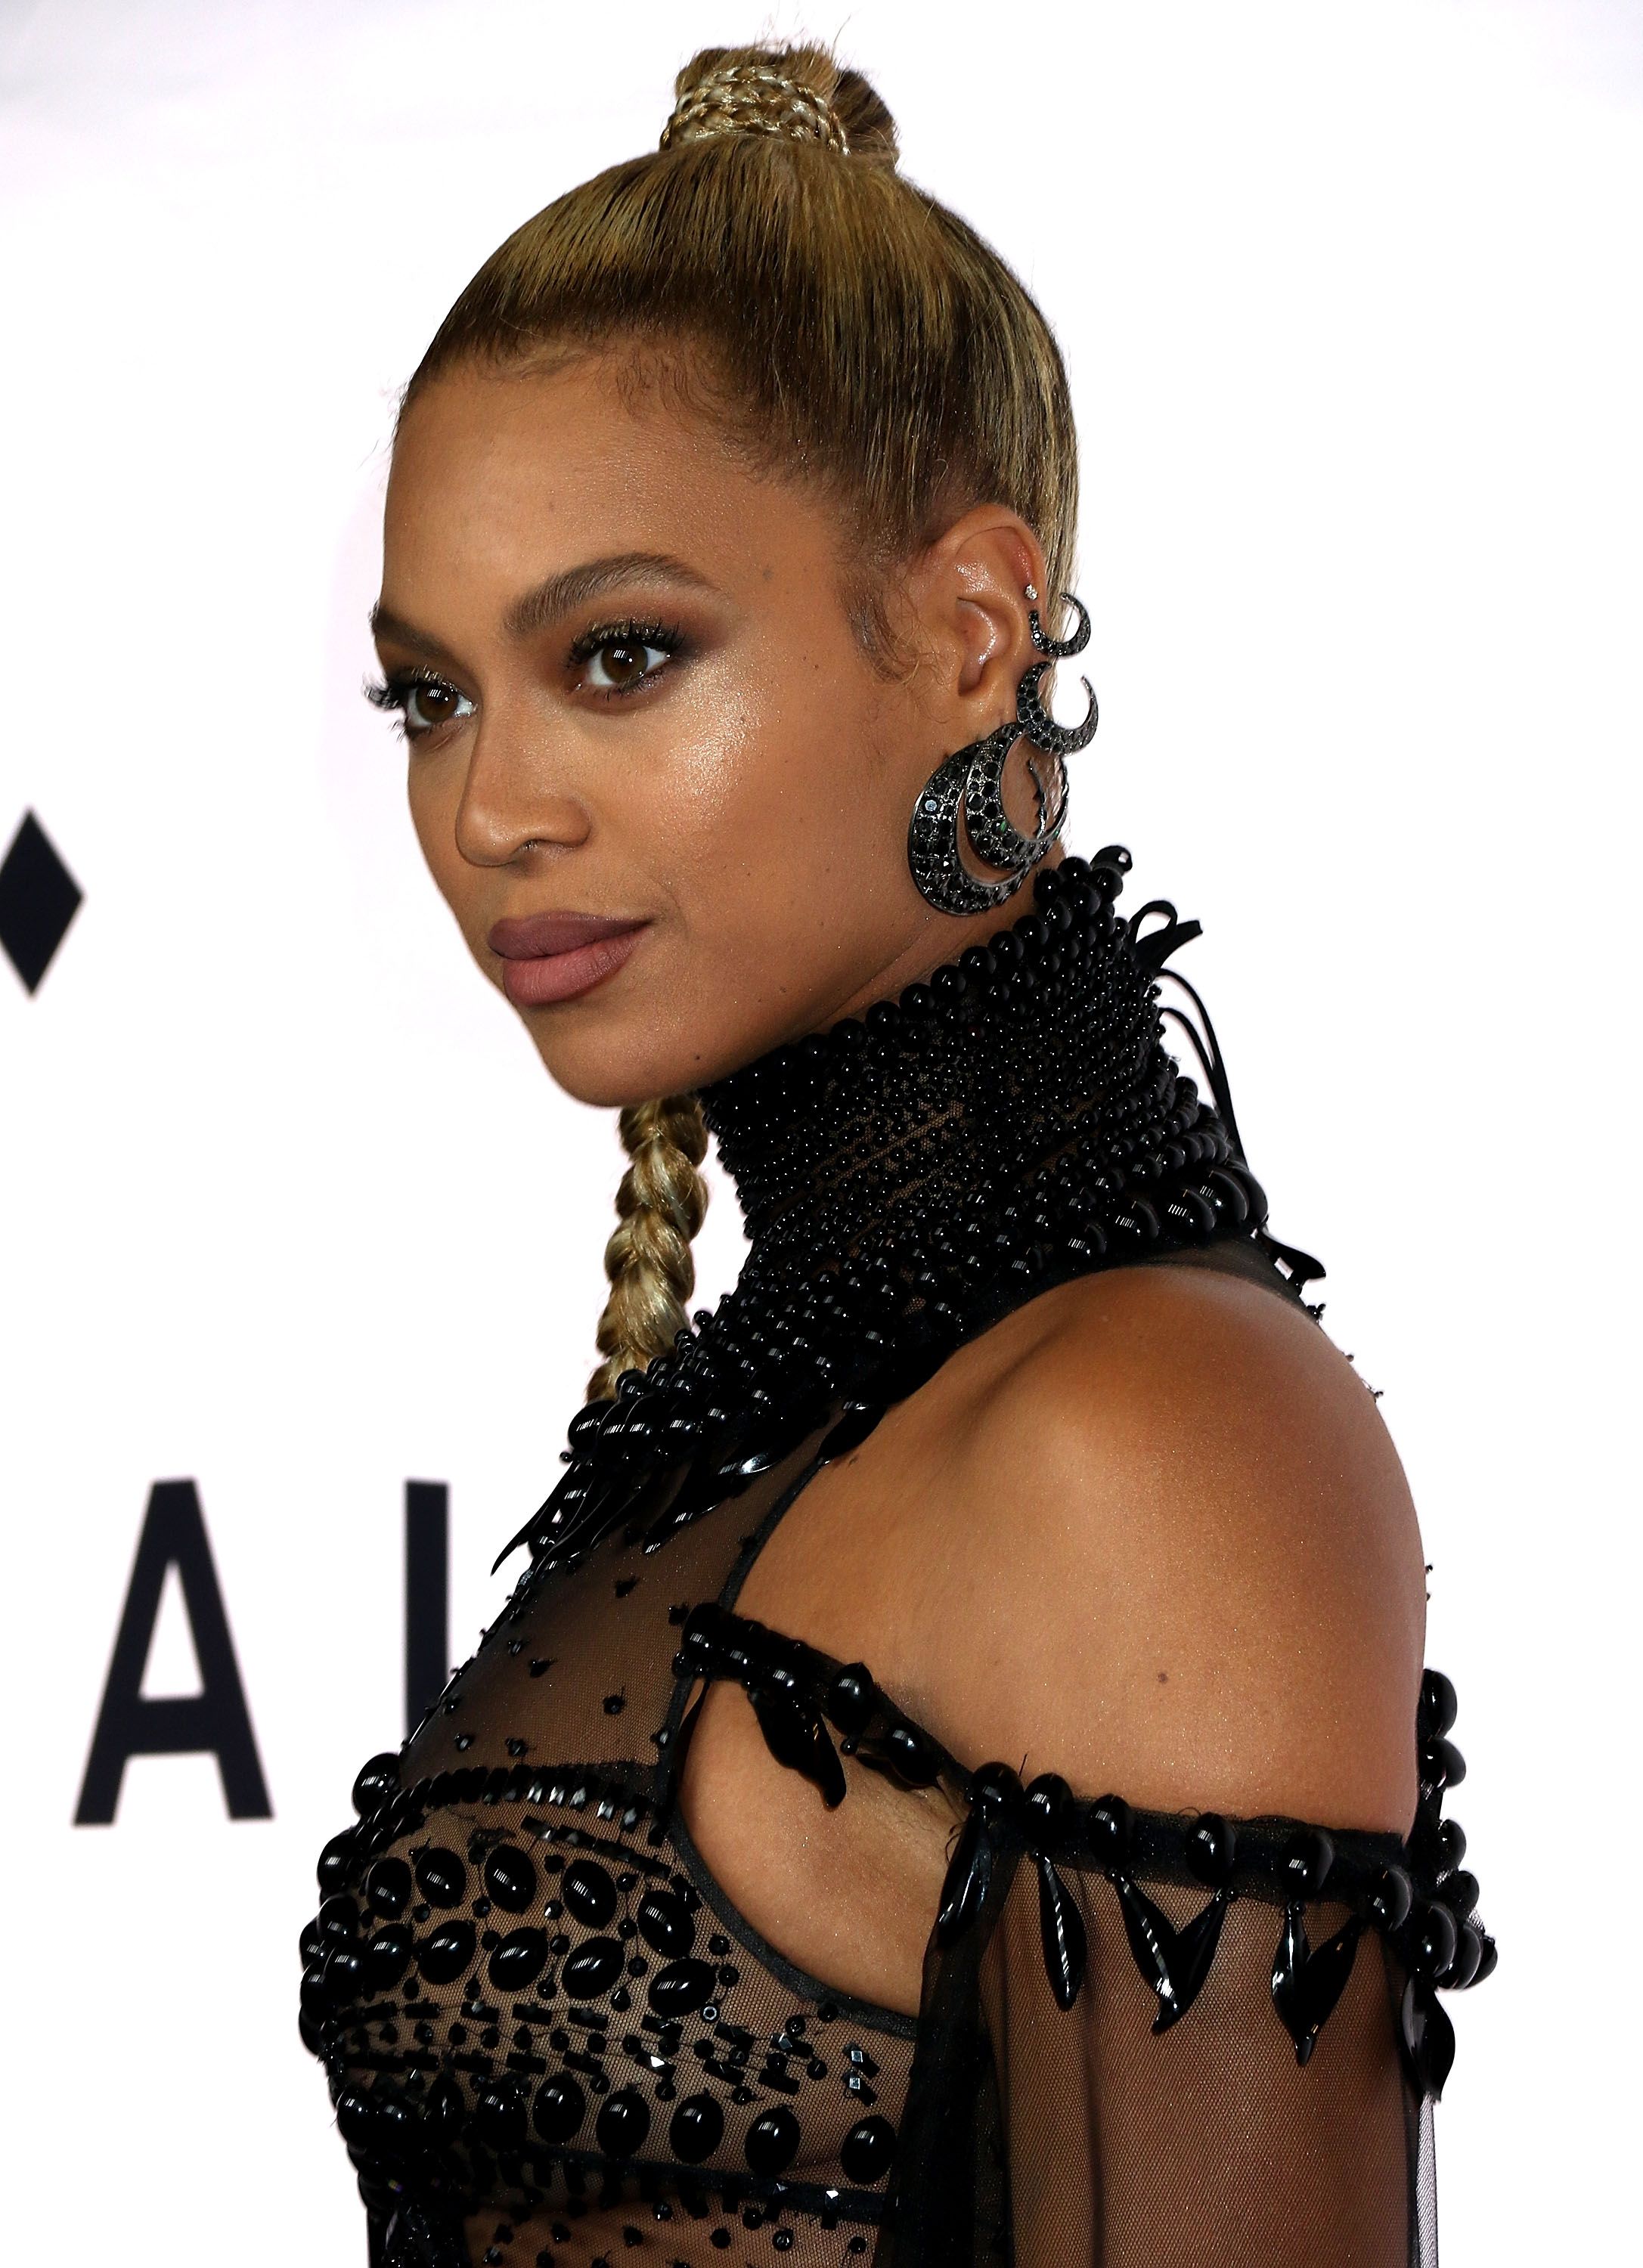 Beyonce Celebrity Porn - See BeyoncÃ©'s Little Black Dress Including Bra Cutouts and Mesh Sleeves